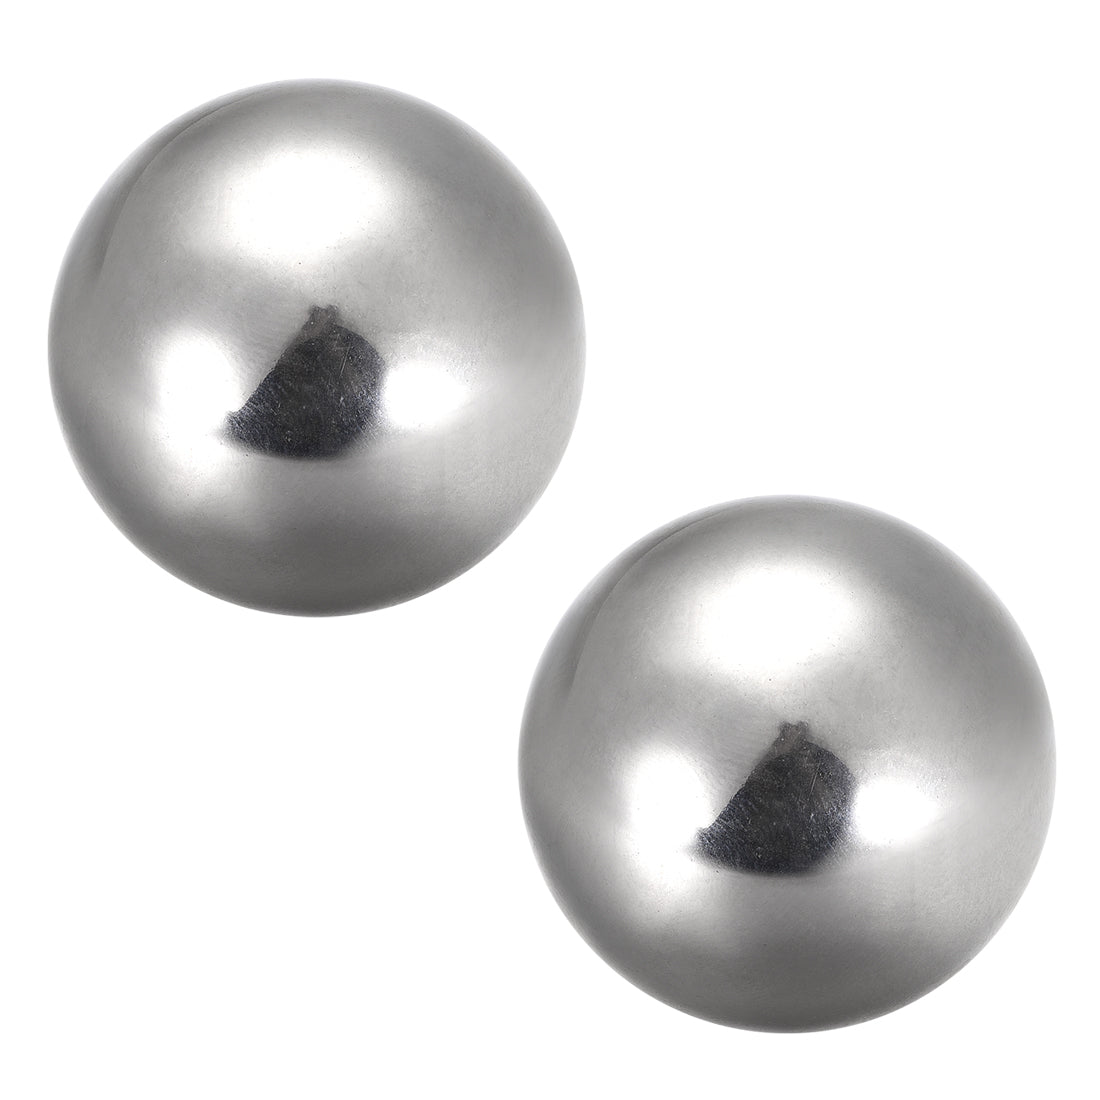 Uxcell Uxcell Precision 304 Stainless Steel Bearing Balls 1-3/4 Inch G5 2pcs